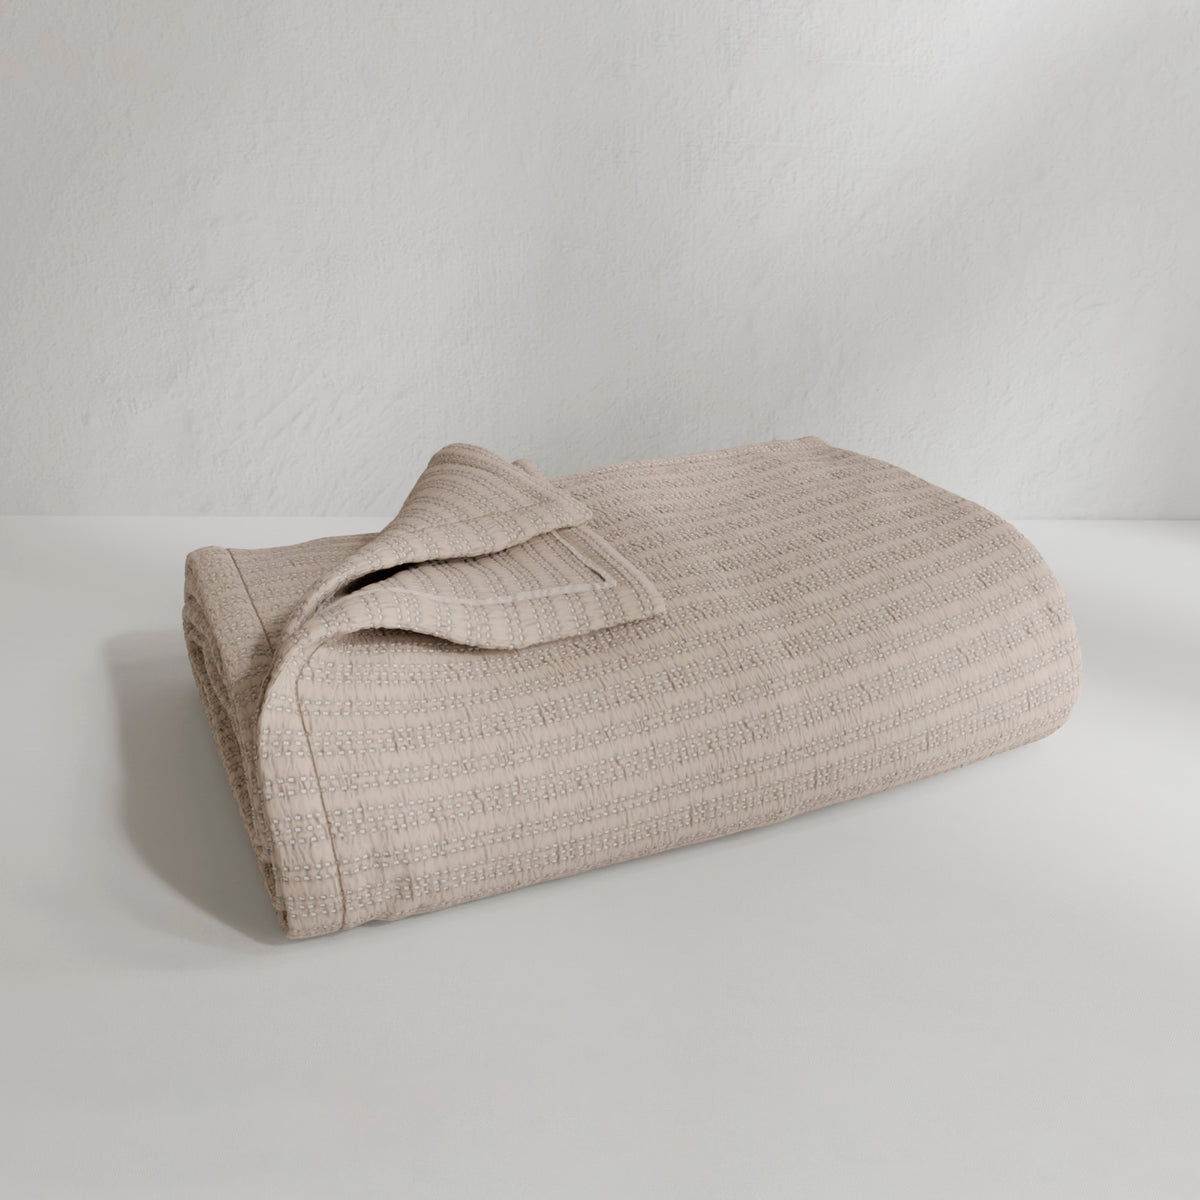 Image of a neatly folded Oatmeal Everyday Cotton Coverlet with the back left corner folded up on a white background